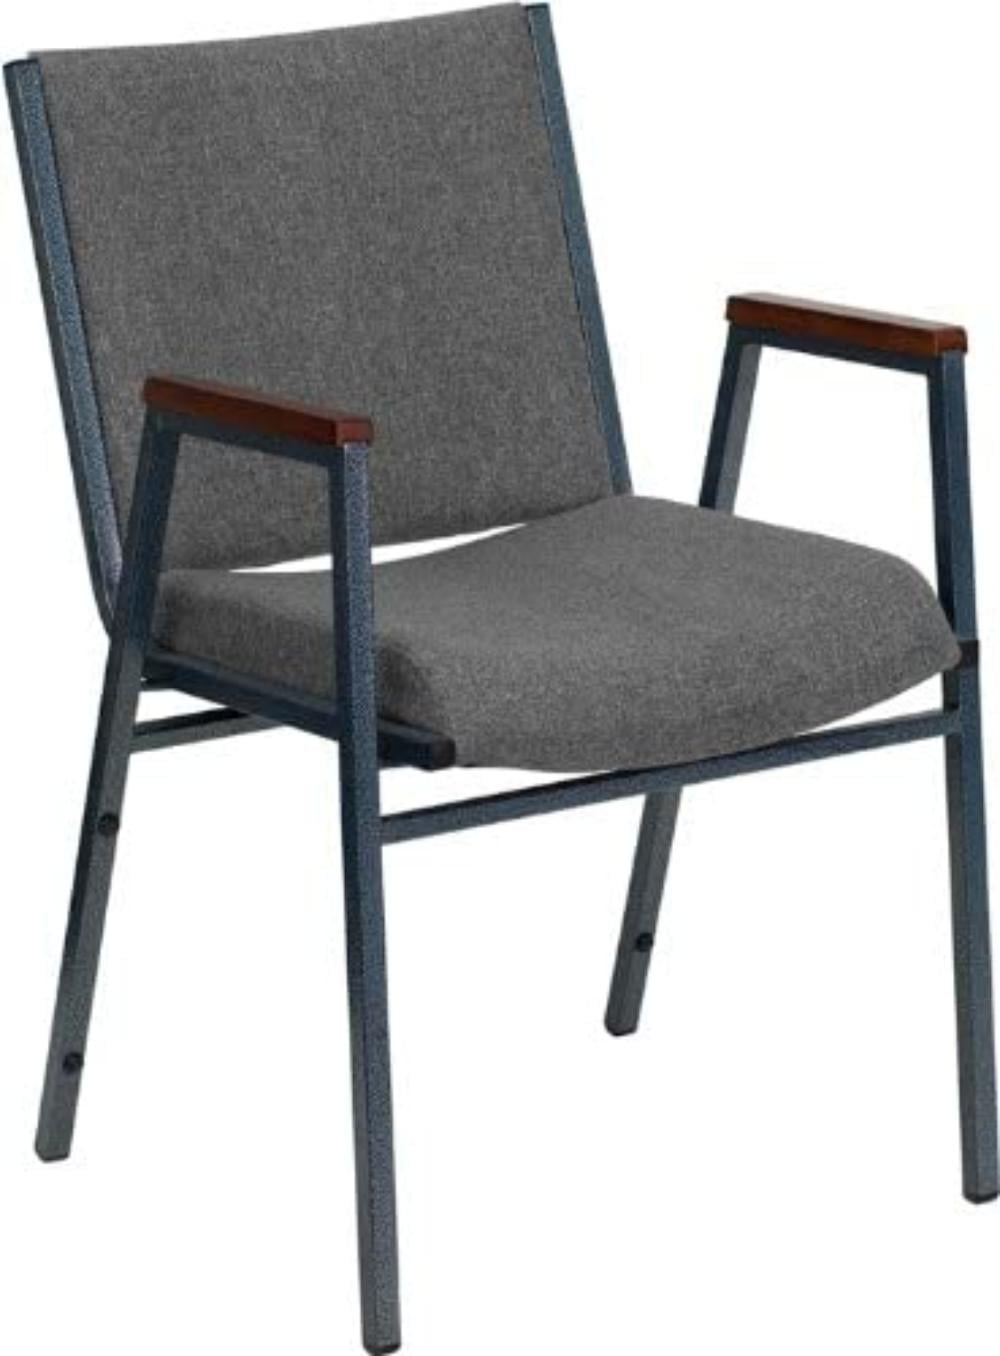 HEAVY DUTY GRAY FABRIC STACK OFFICE CHAIR with ARMS 